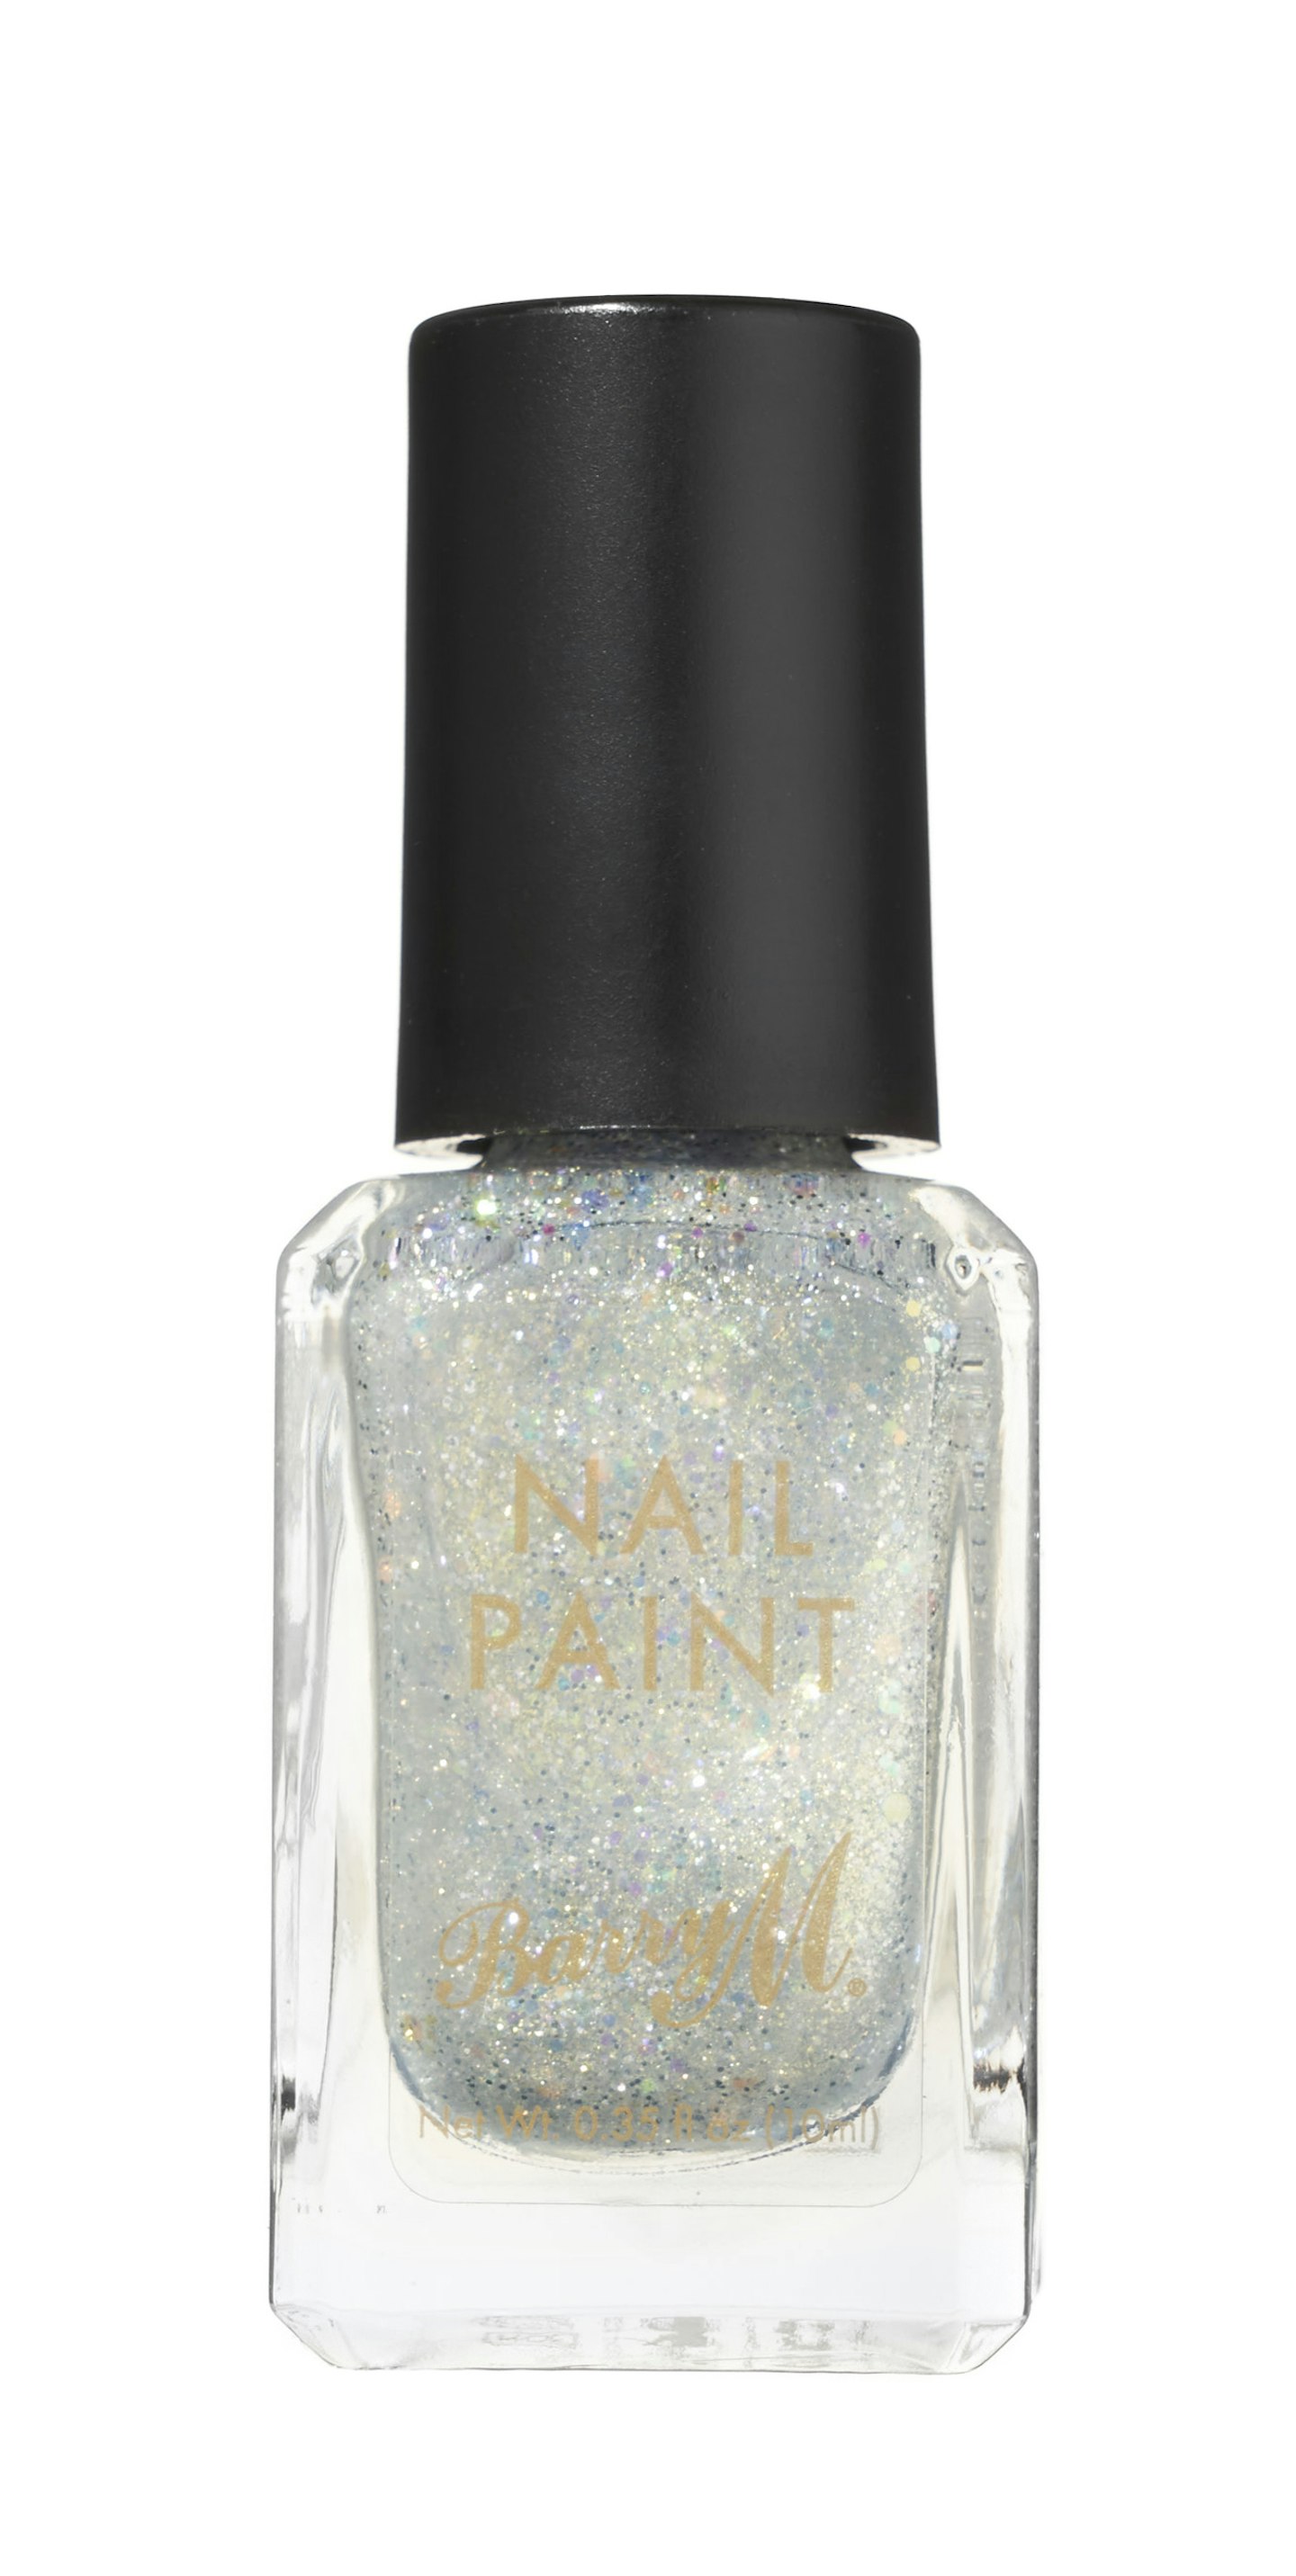 BARRY M COSMETICS NAIL PAINT IN PURE SUNSHINE- FULL SIZE